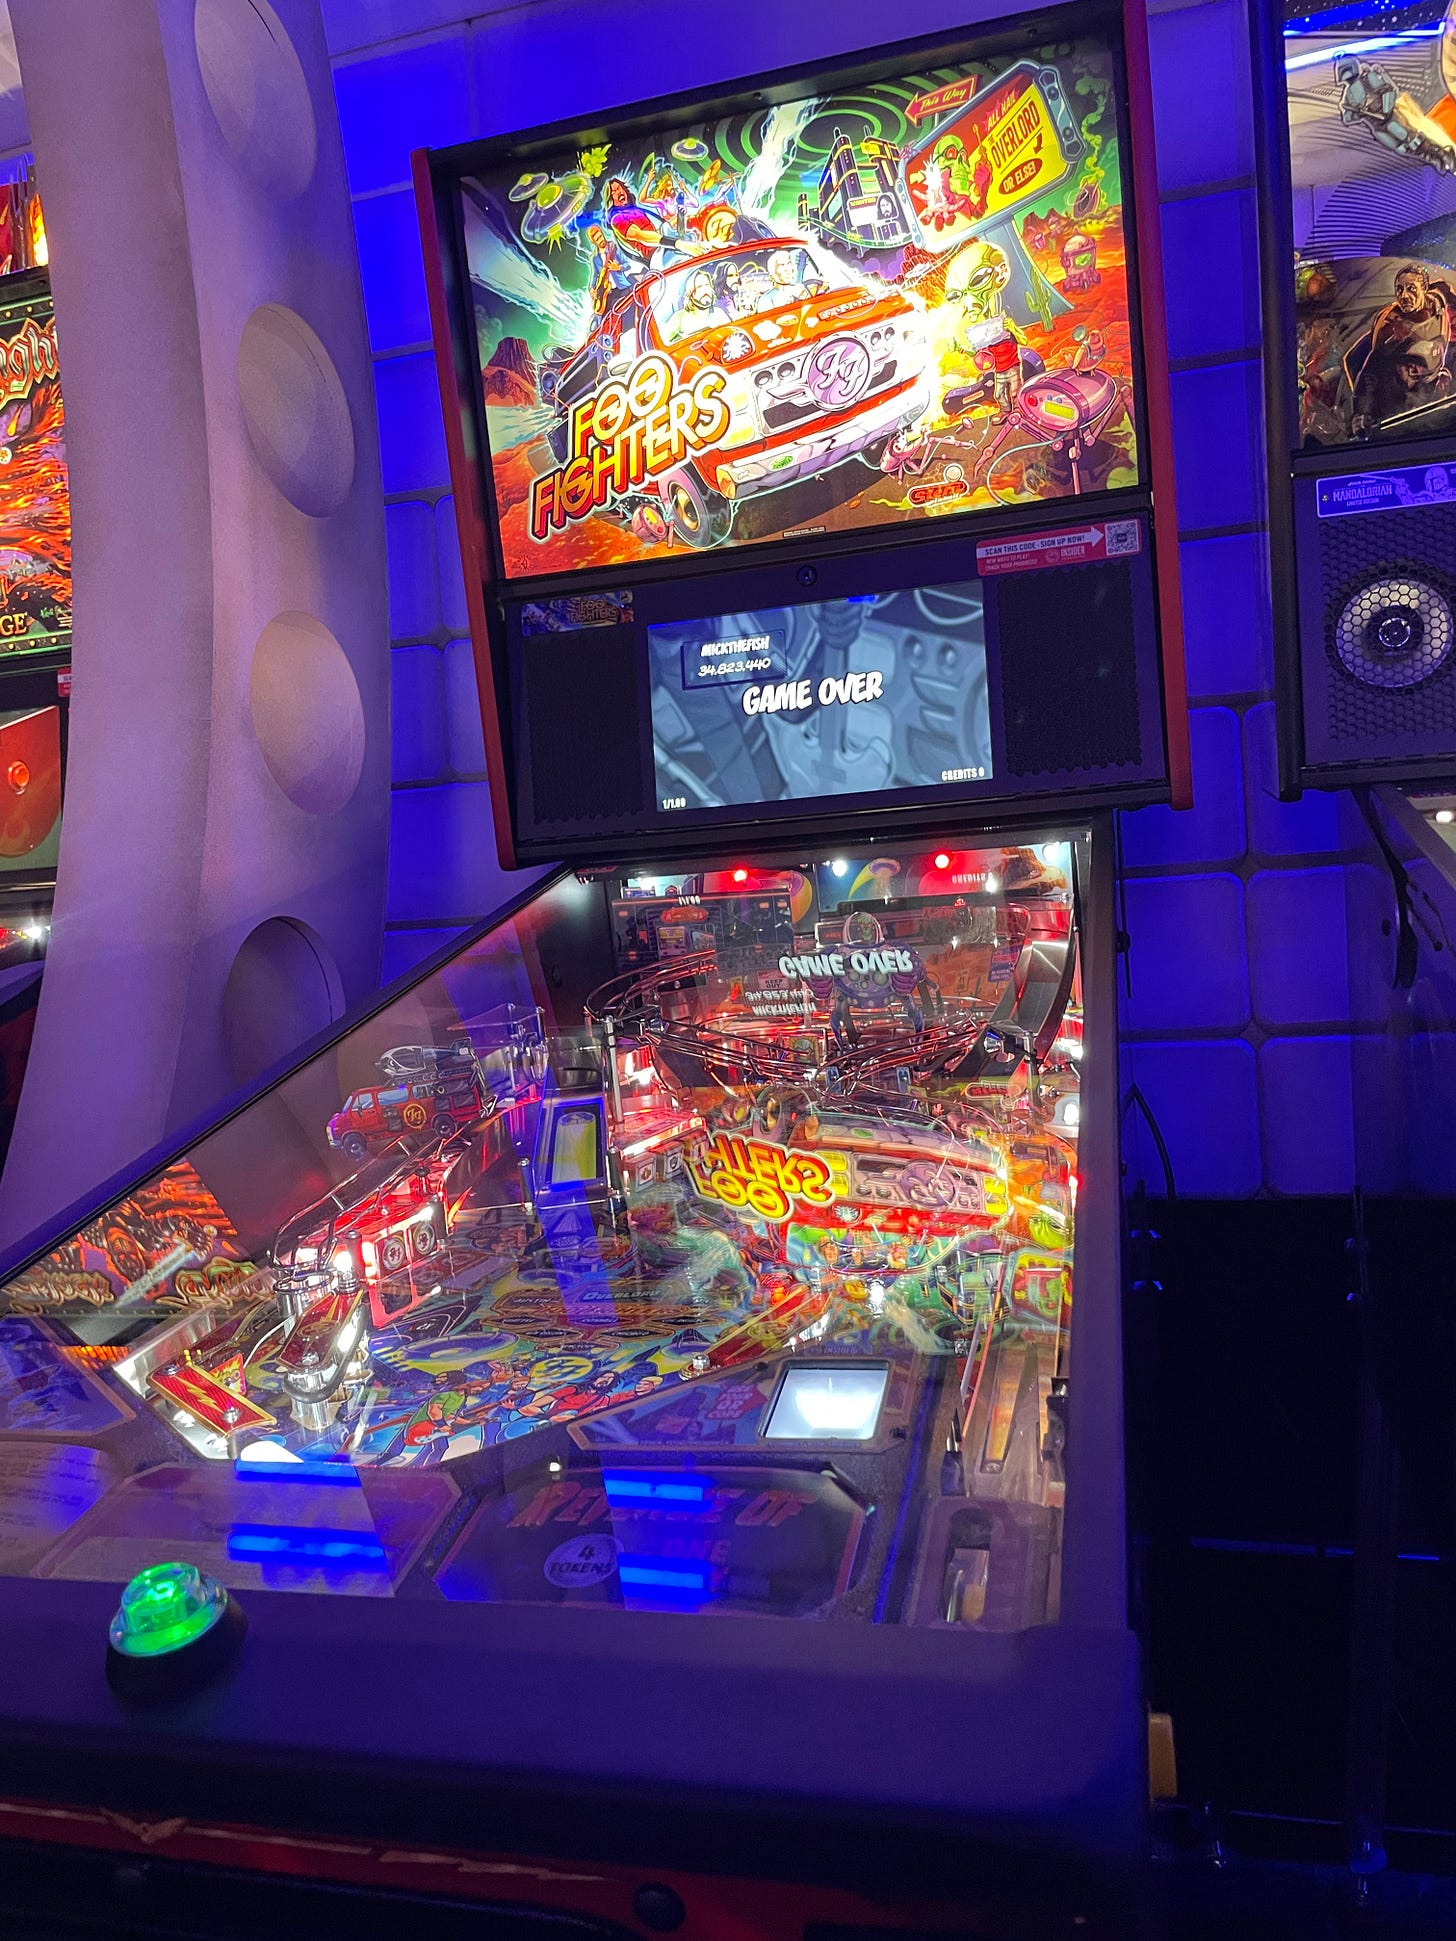 A photo of a very colorful Foo Fighters pinball machine in a small room designed to look like the interior of a spaceship with purple lighting.